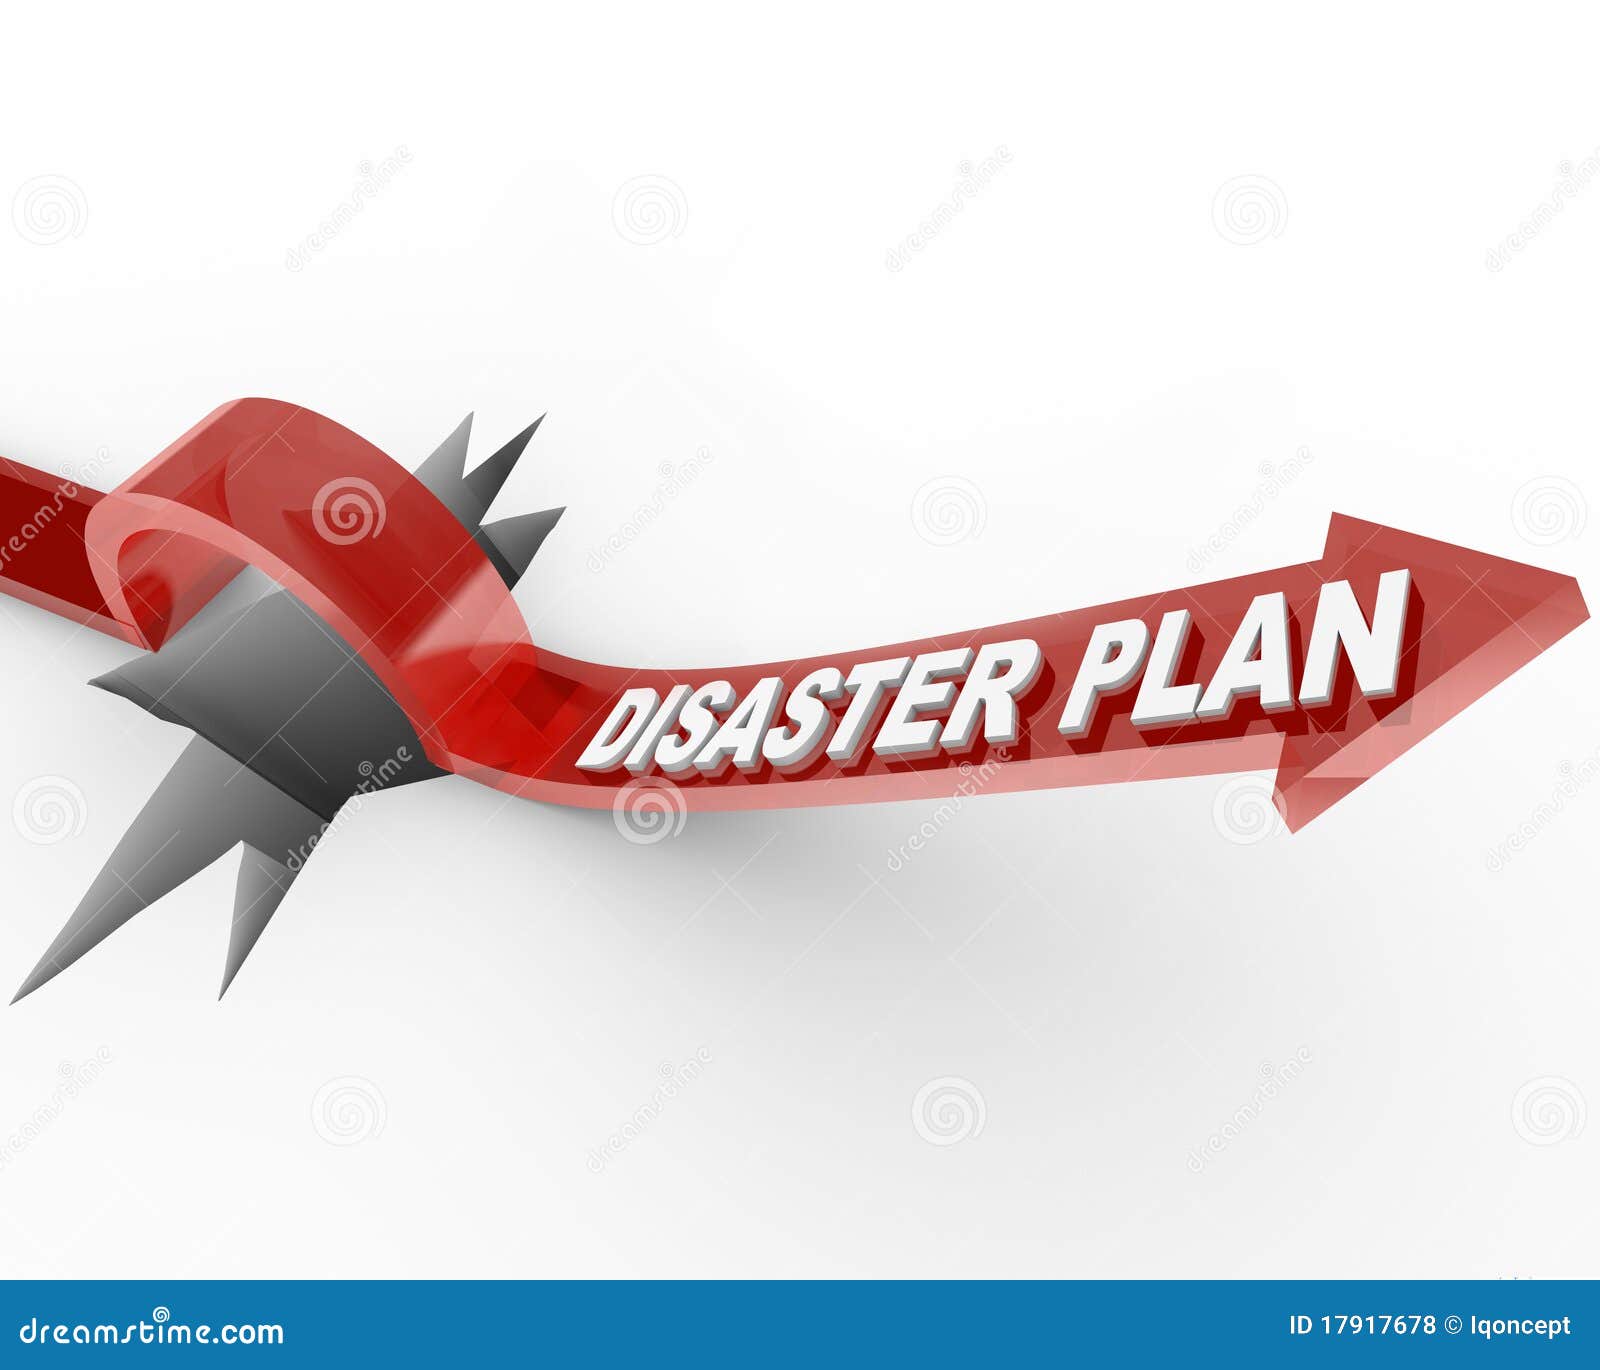 disaster plan - arrow jumping over hole